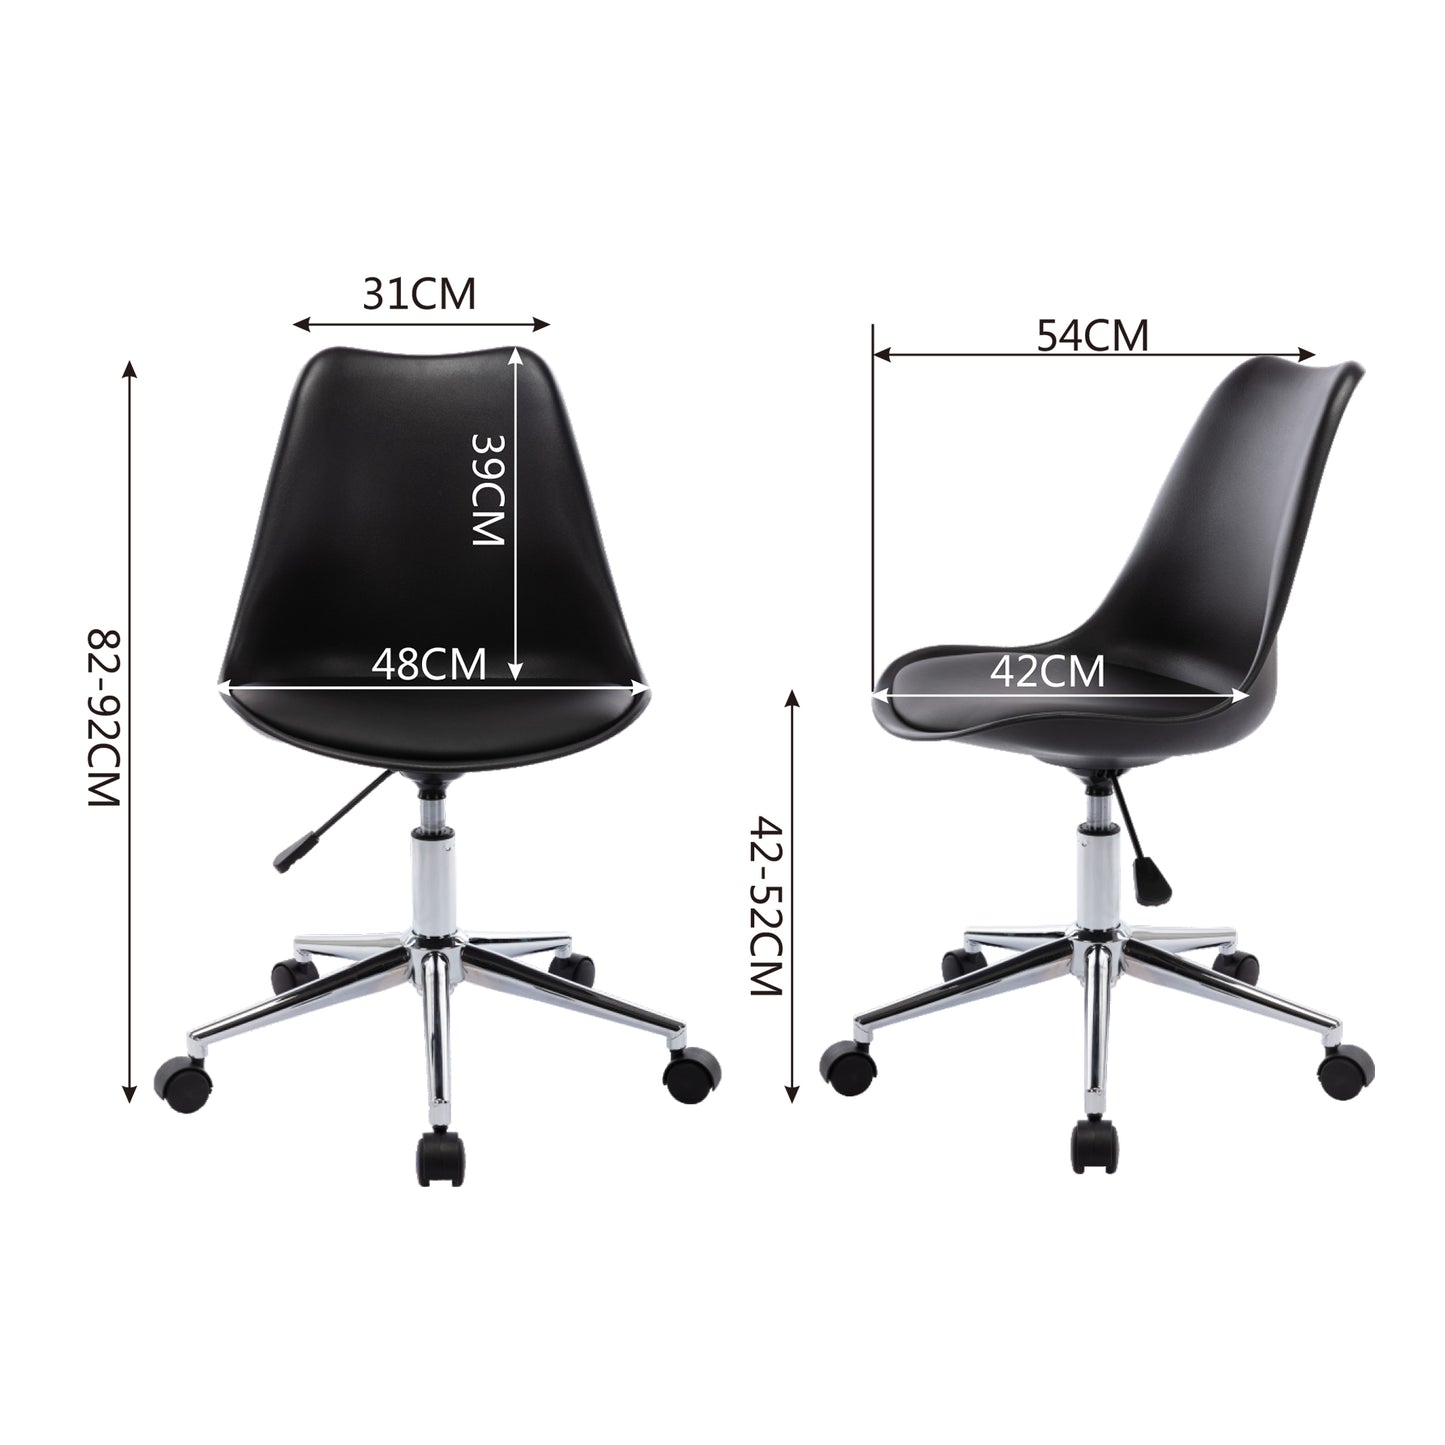 CHOTTO - Ando Office Desk Chair with Vegan Leather Seat - Black